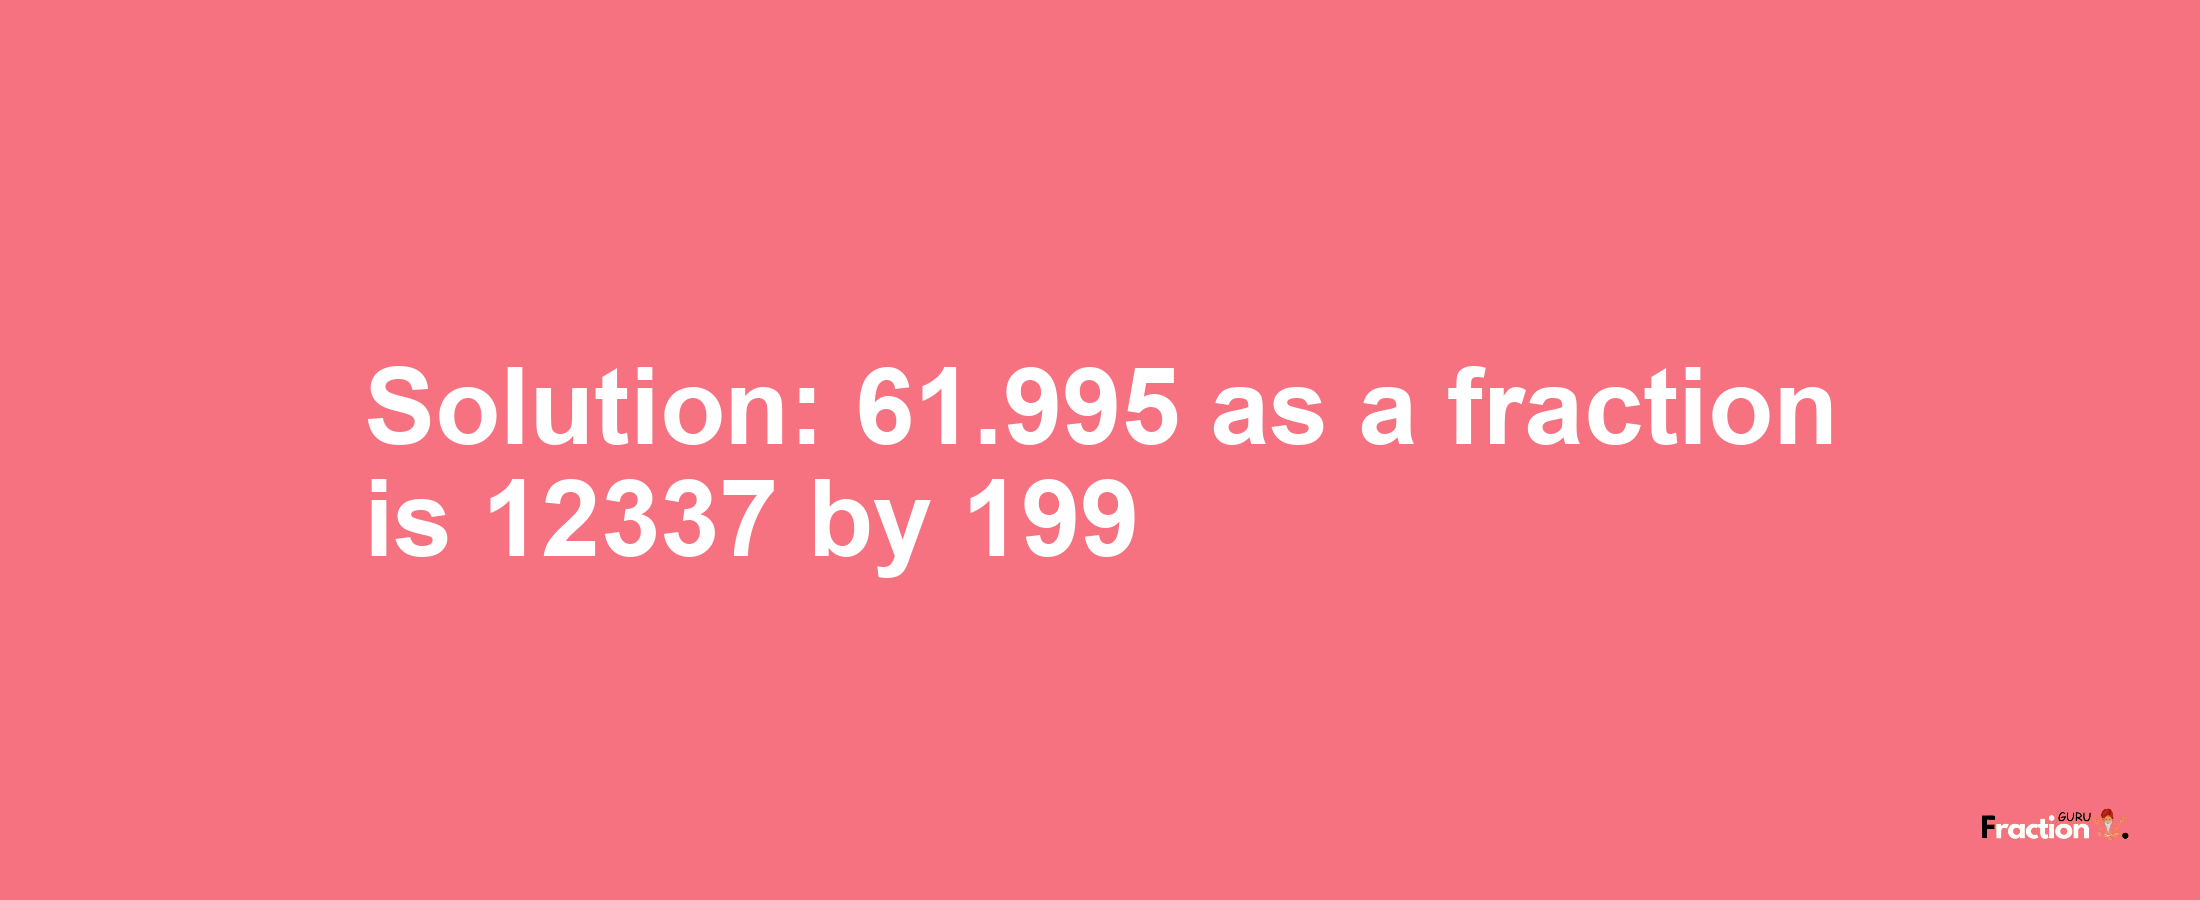 Solution:61.995 as a fraction is 12337/199